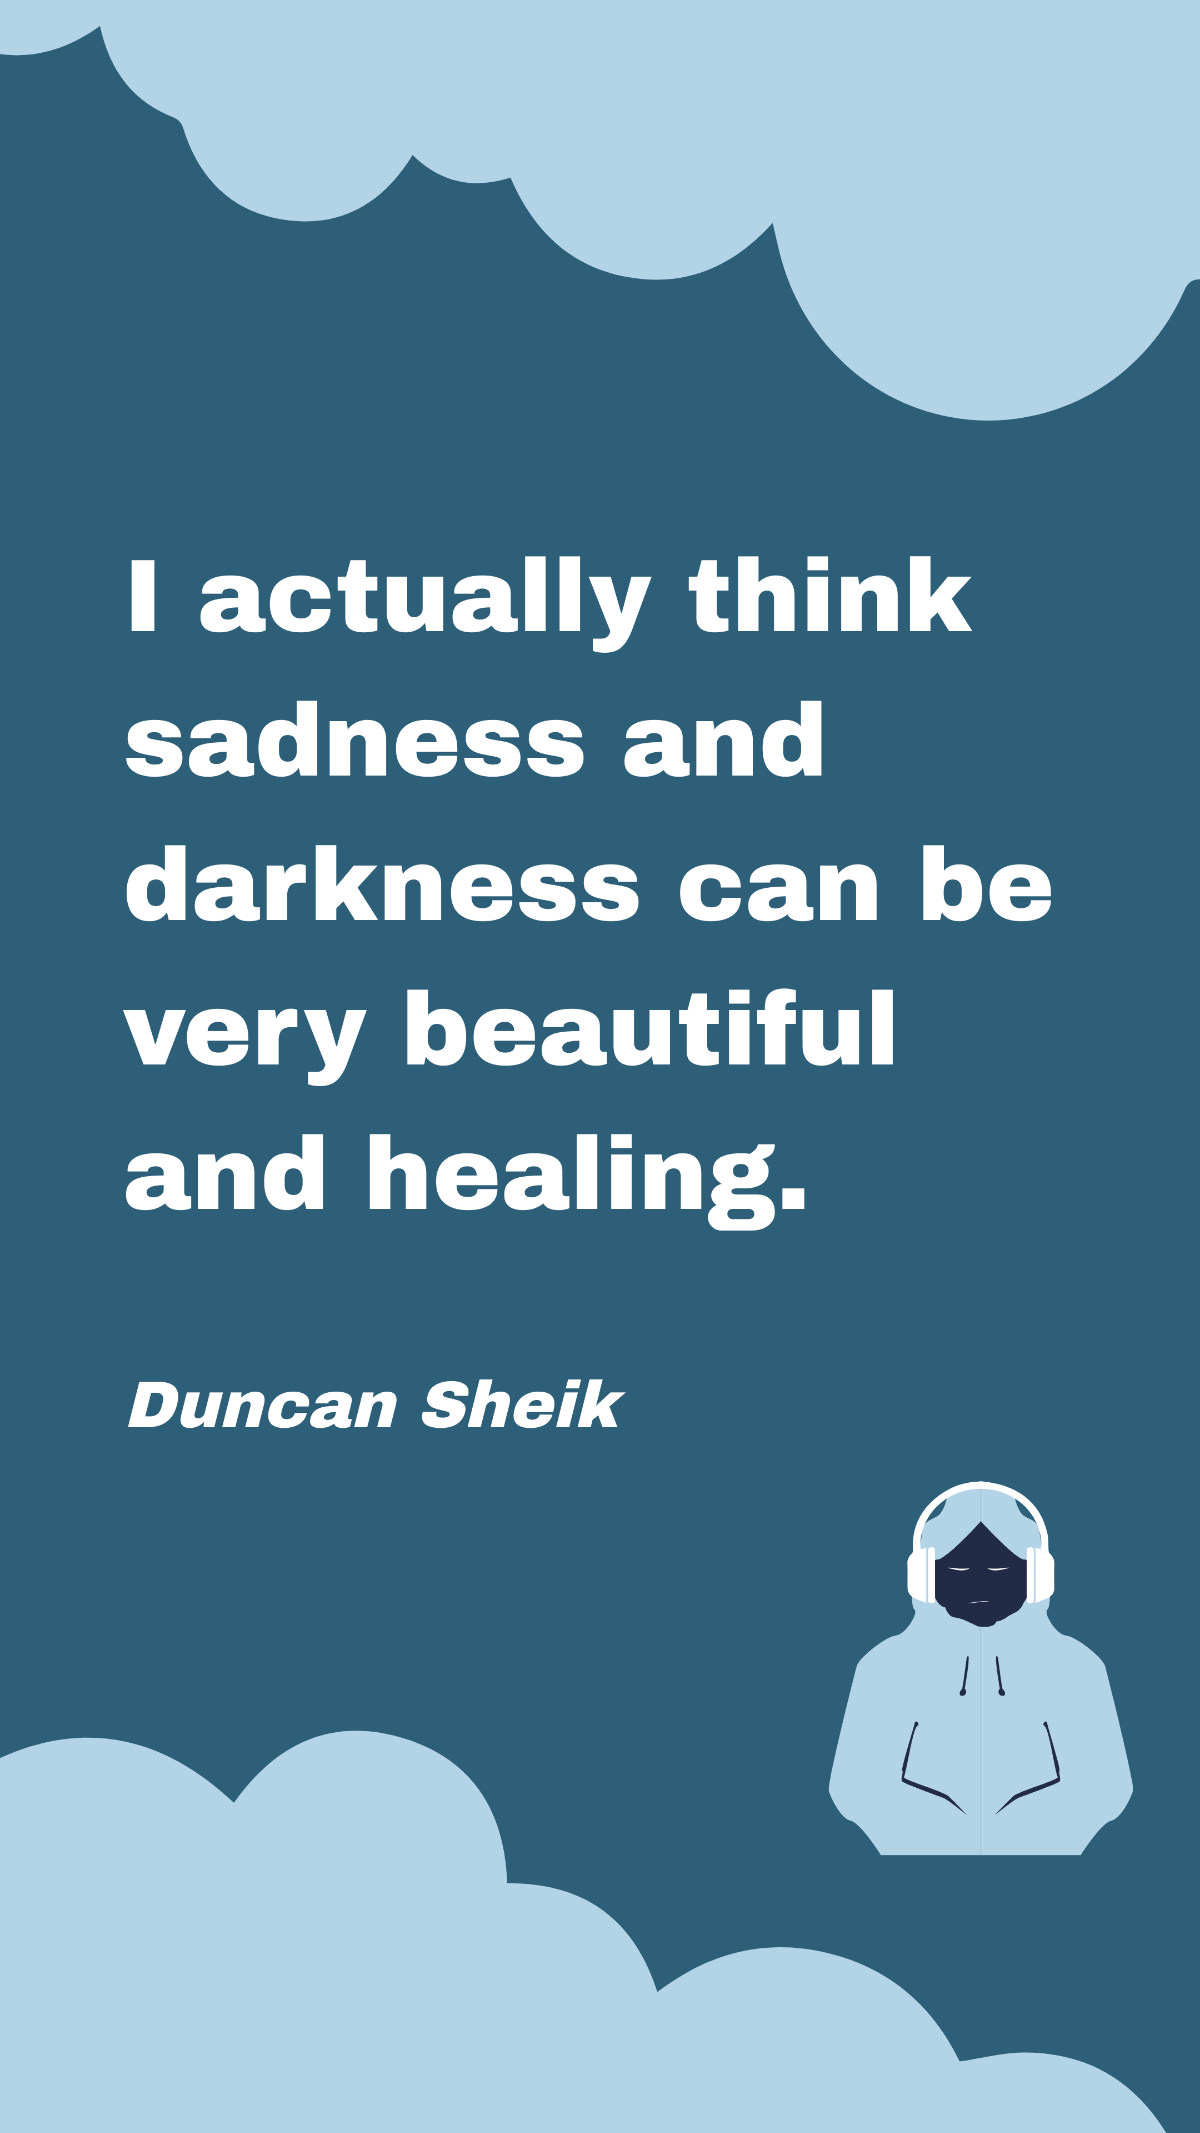 Free Duncan Sheik - I actually think sadness and darkness can be very beautiful and healing. Template